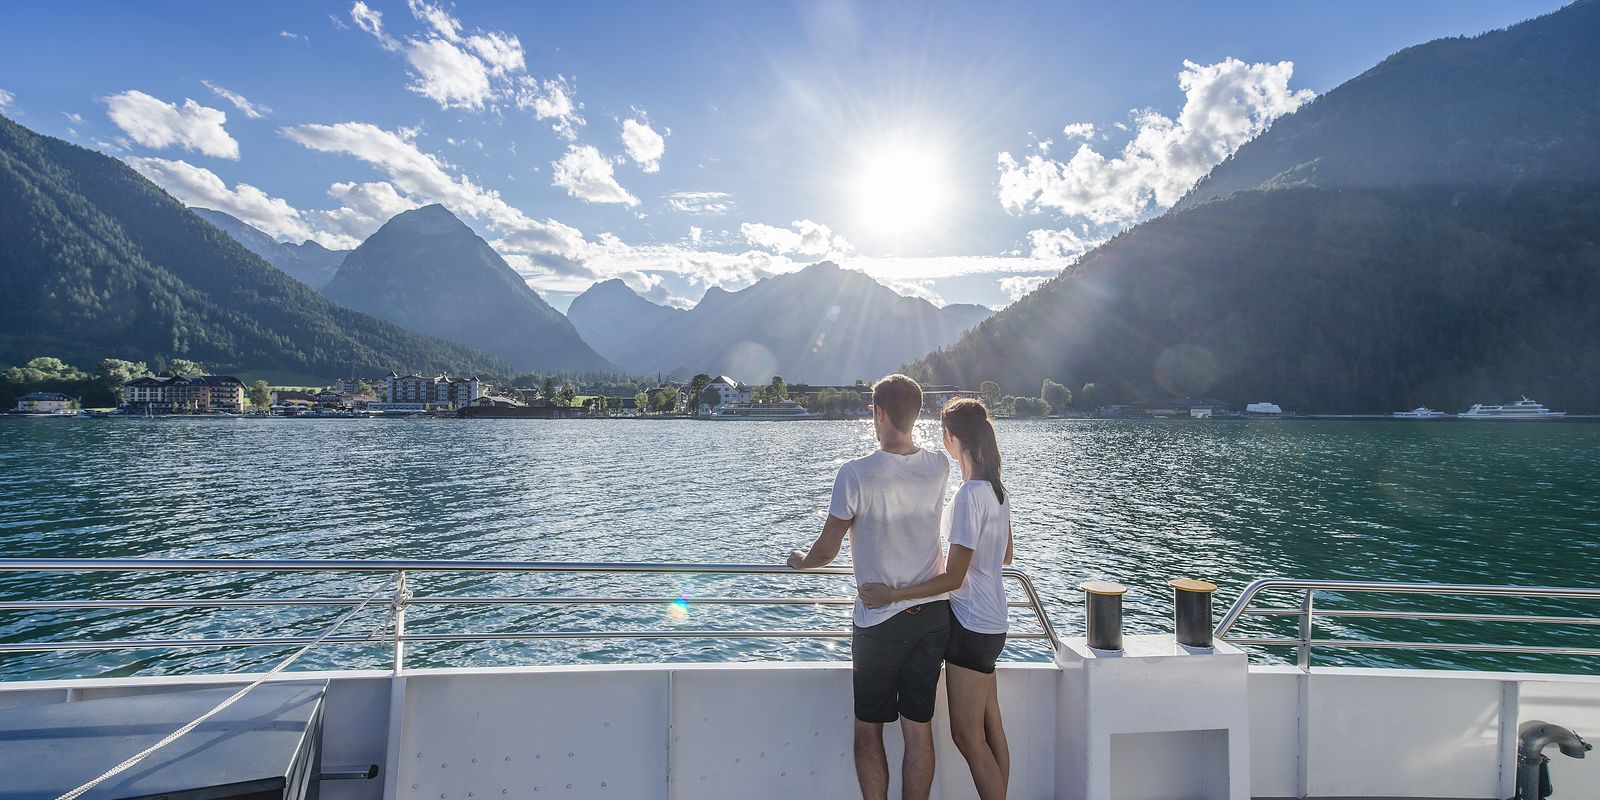 Boat ride at sunset @Achensee Tourismus